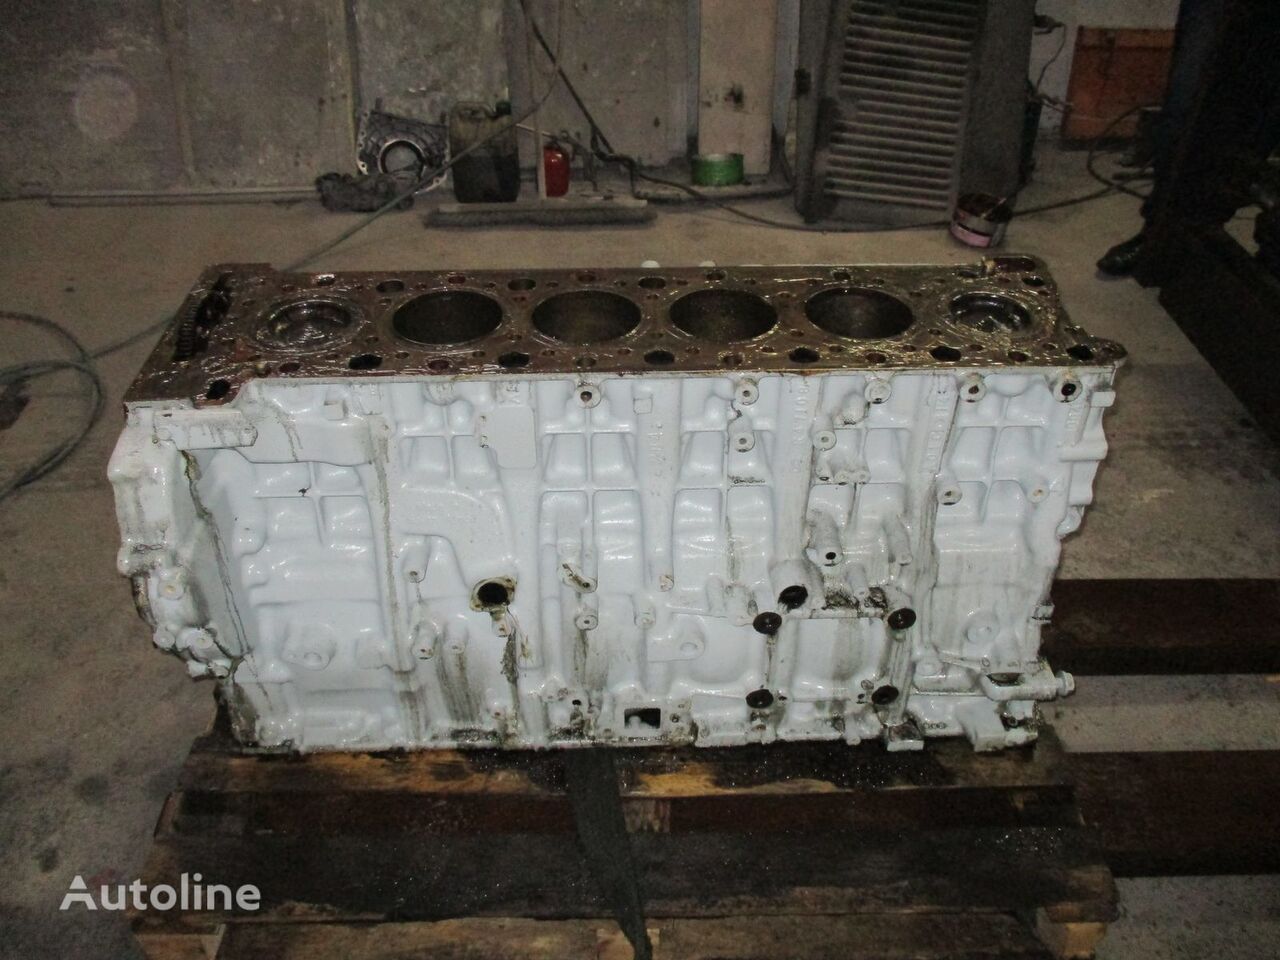 Mercedes-Benz Actros MP4, EURO 5, EURO 6 emission cylinder block, short block, for Mercedes-Benz Actros MP4 truck tractor